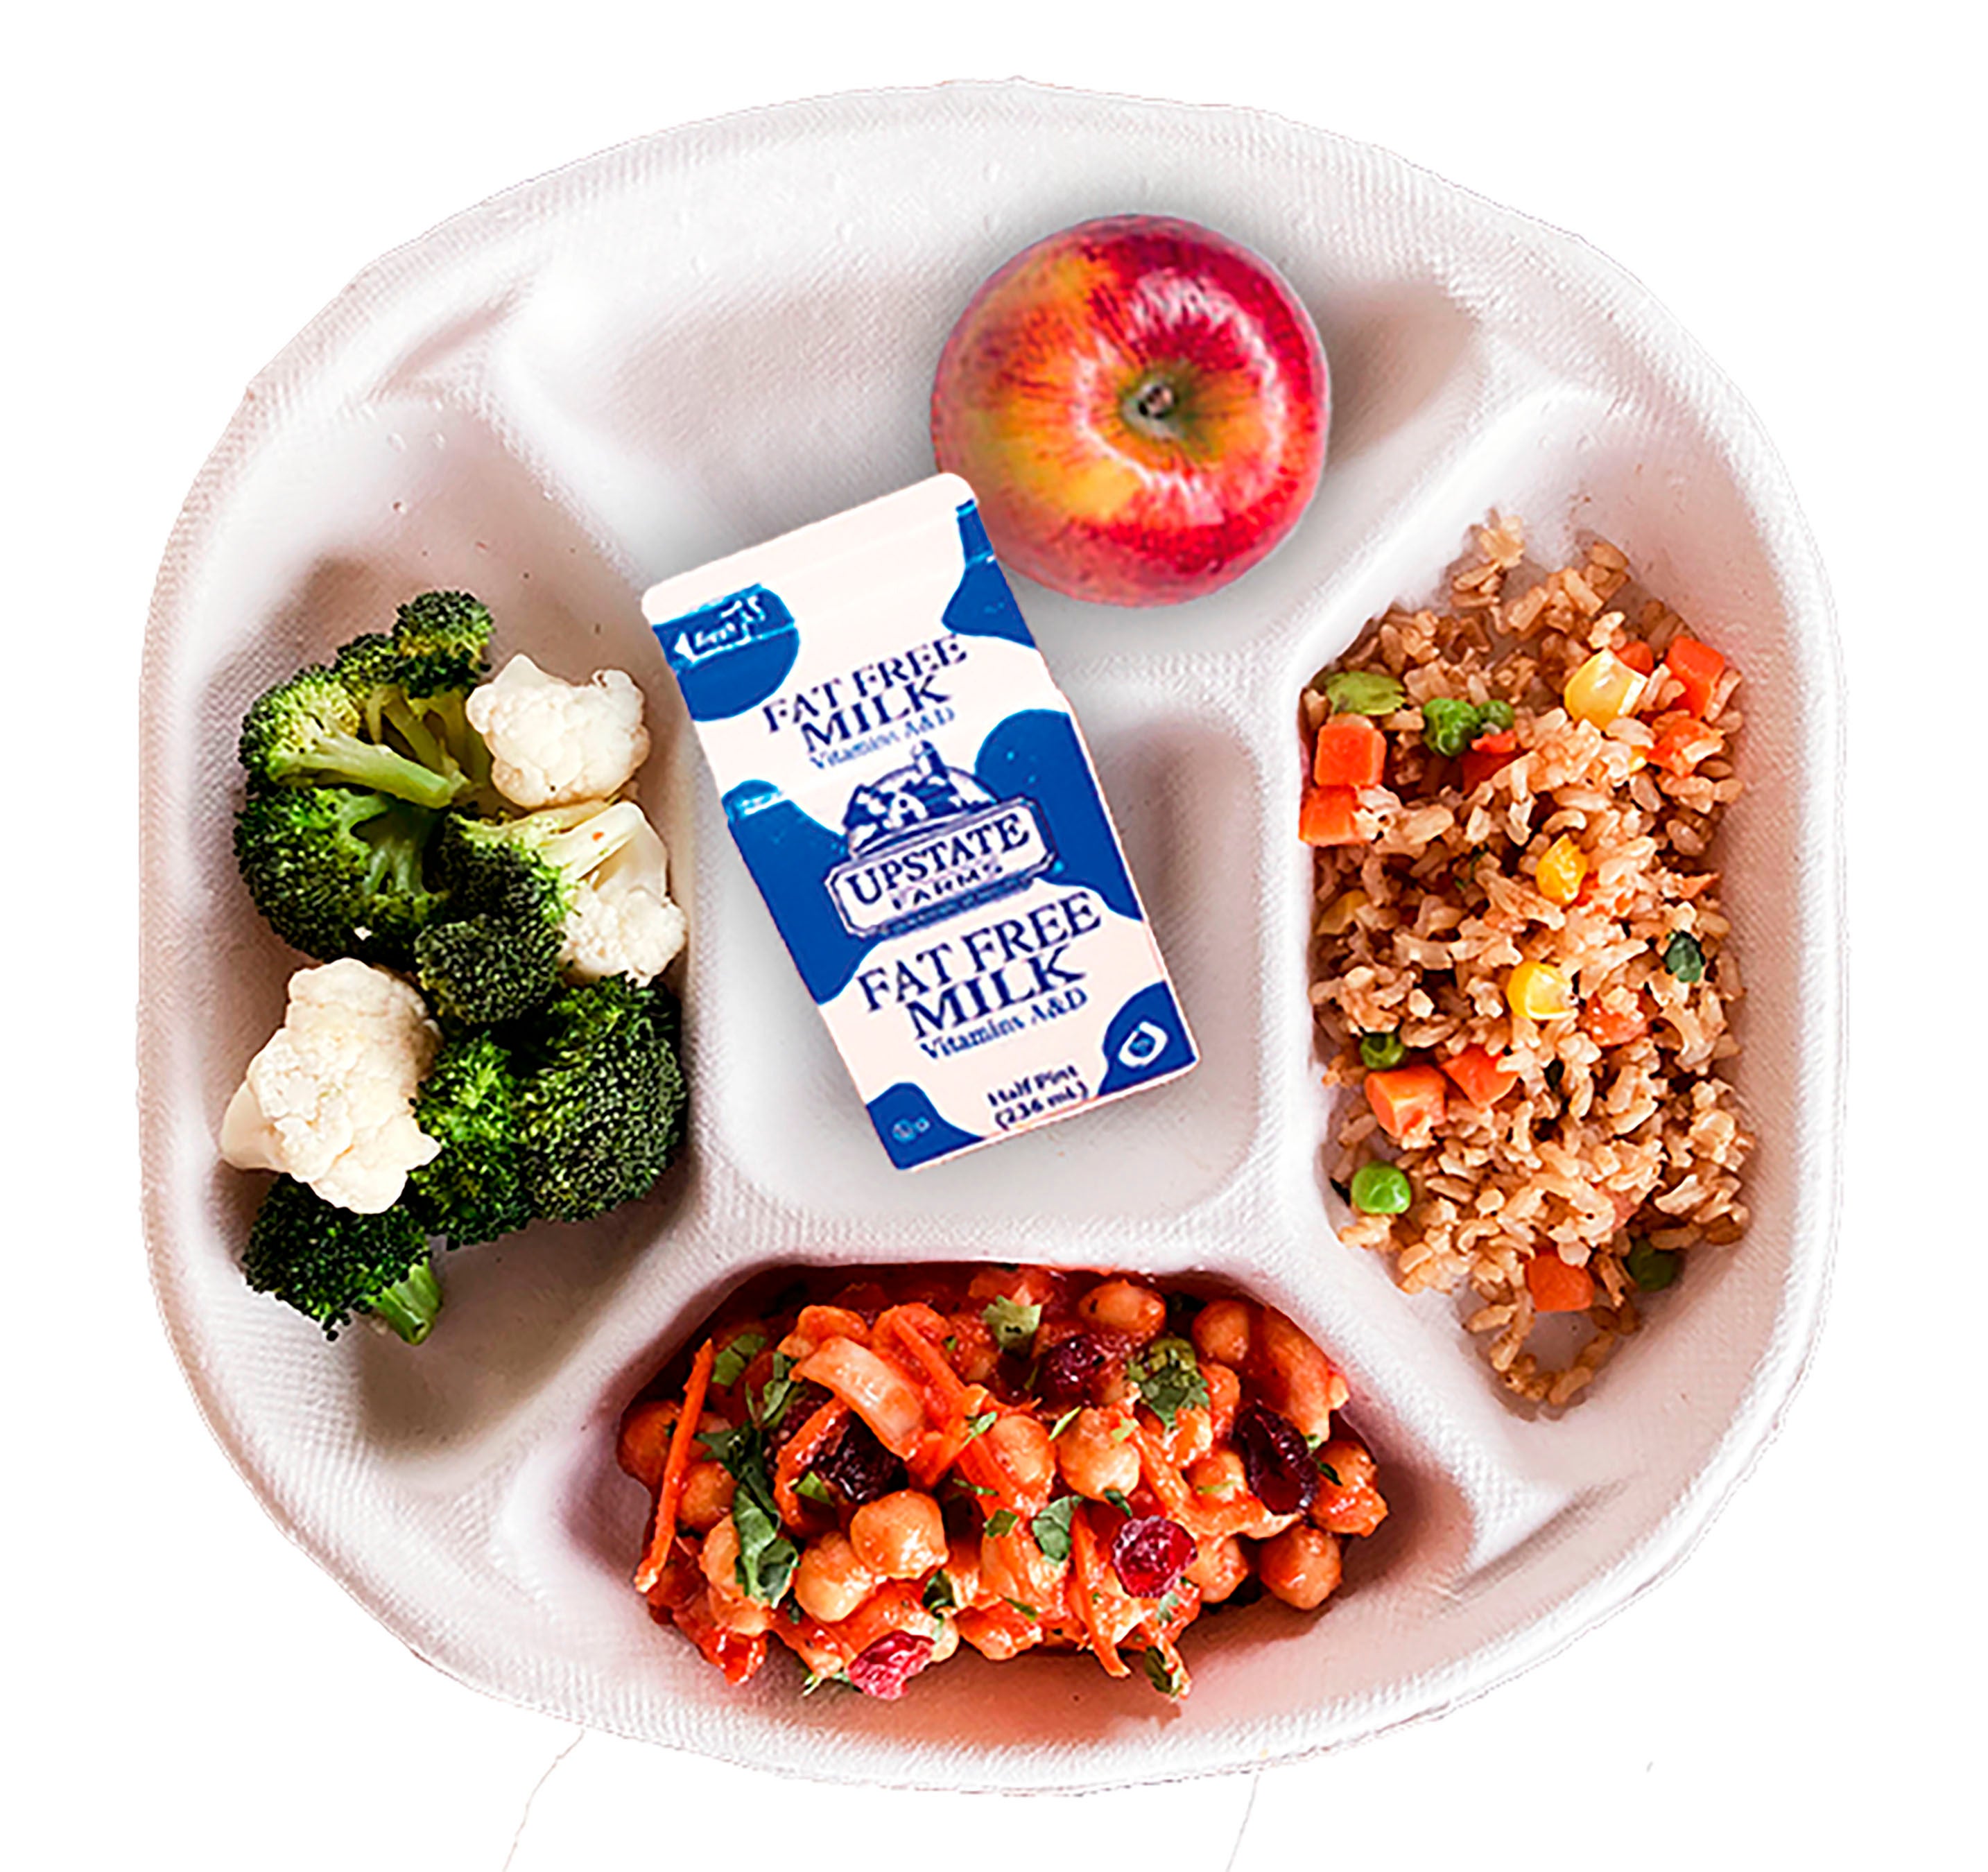 New York City school lunch menu going vegan on Fridays | The Independent